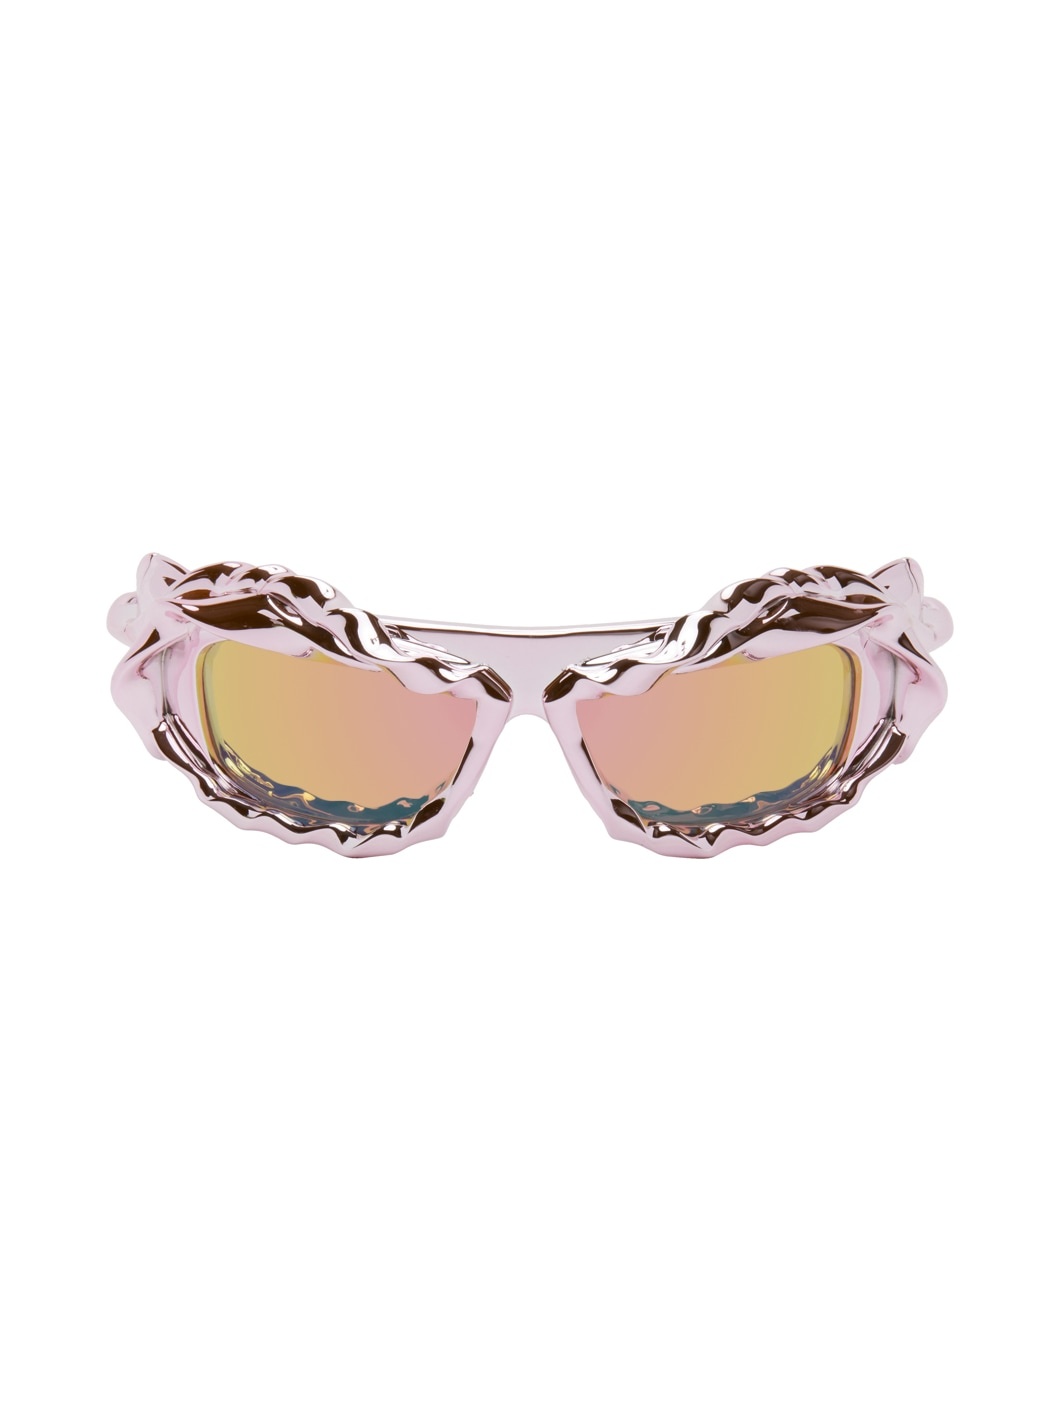 Pink Twisted Sunglasses - 1